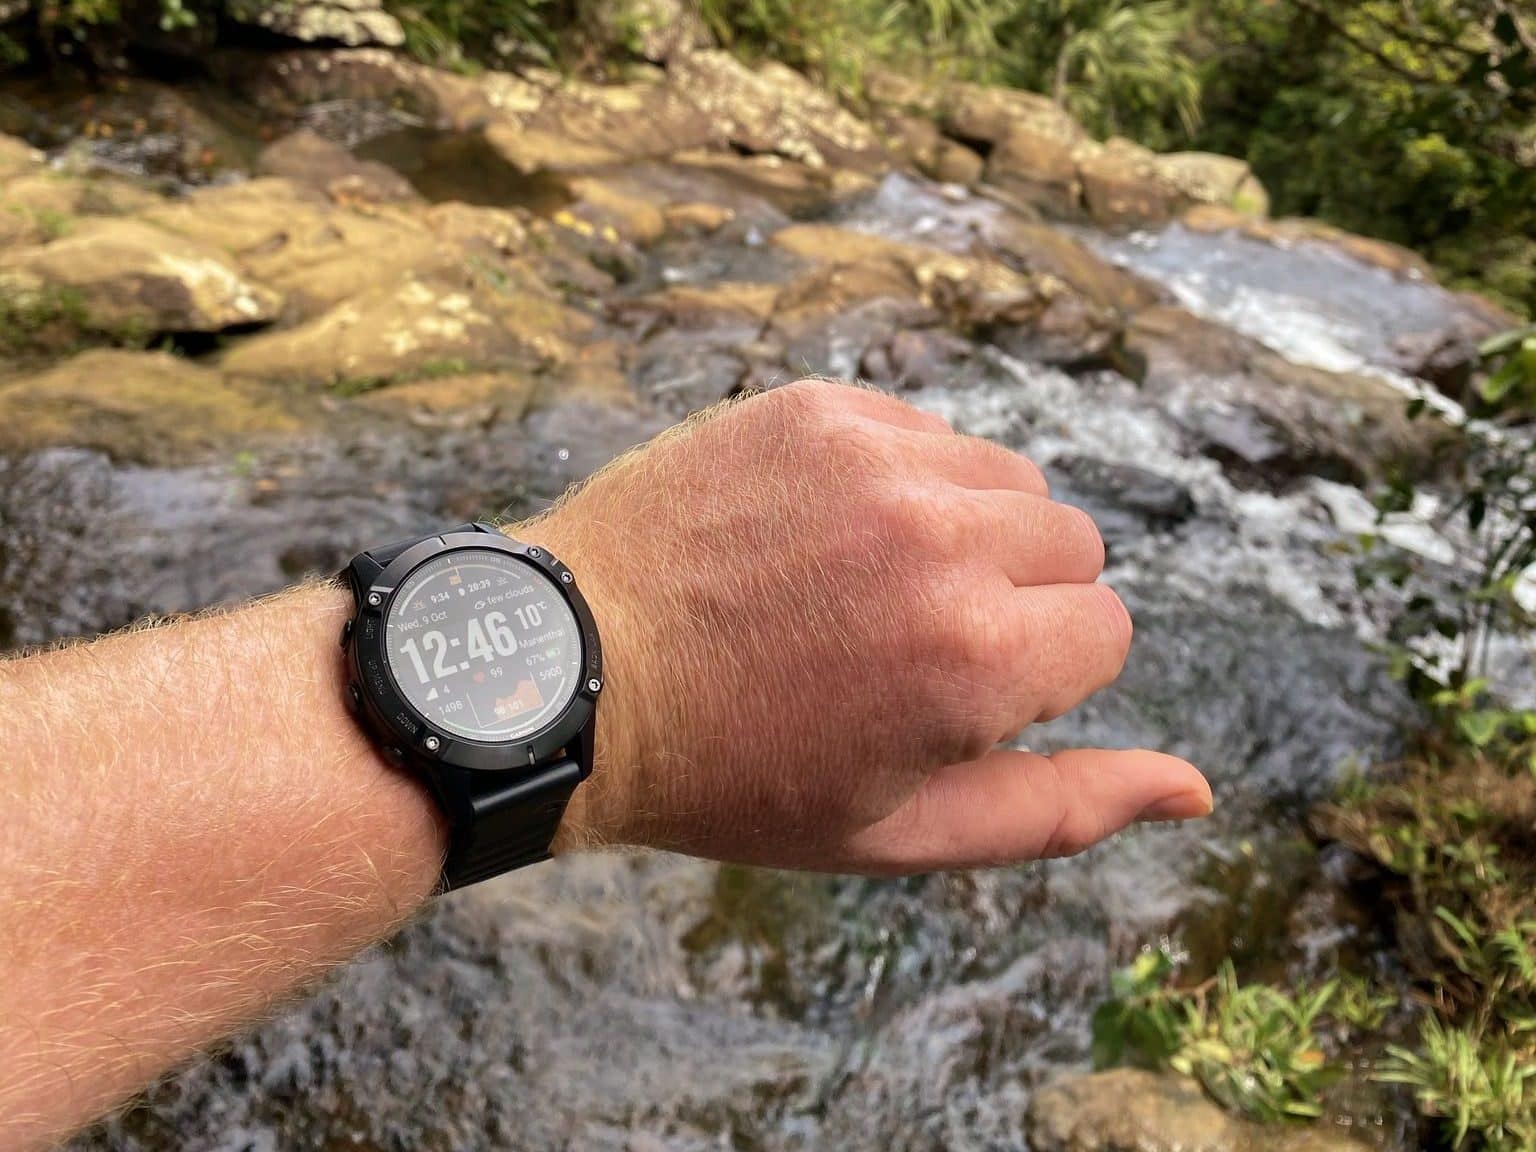 There are many different watches on the market aimed at adventurers and explorers. The most popular types of watches for these groups include mechanical watches, smart watches, outdoor watches, and sports watches.